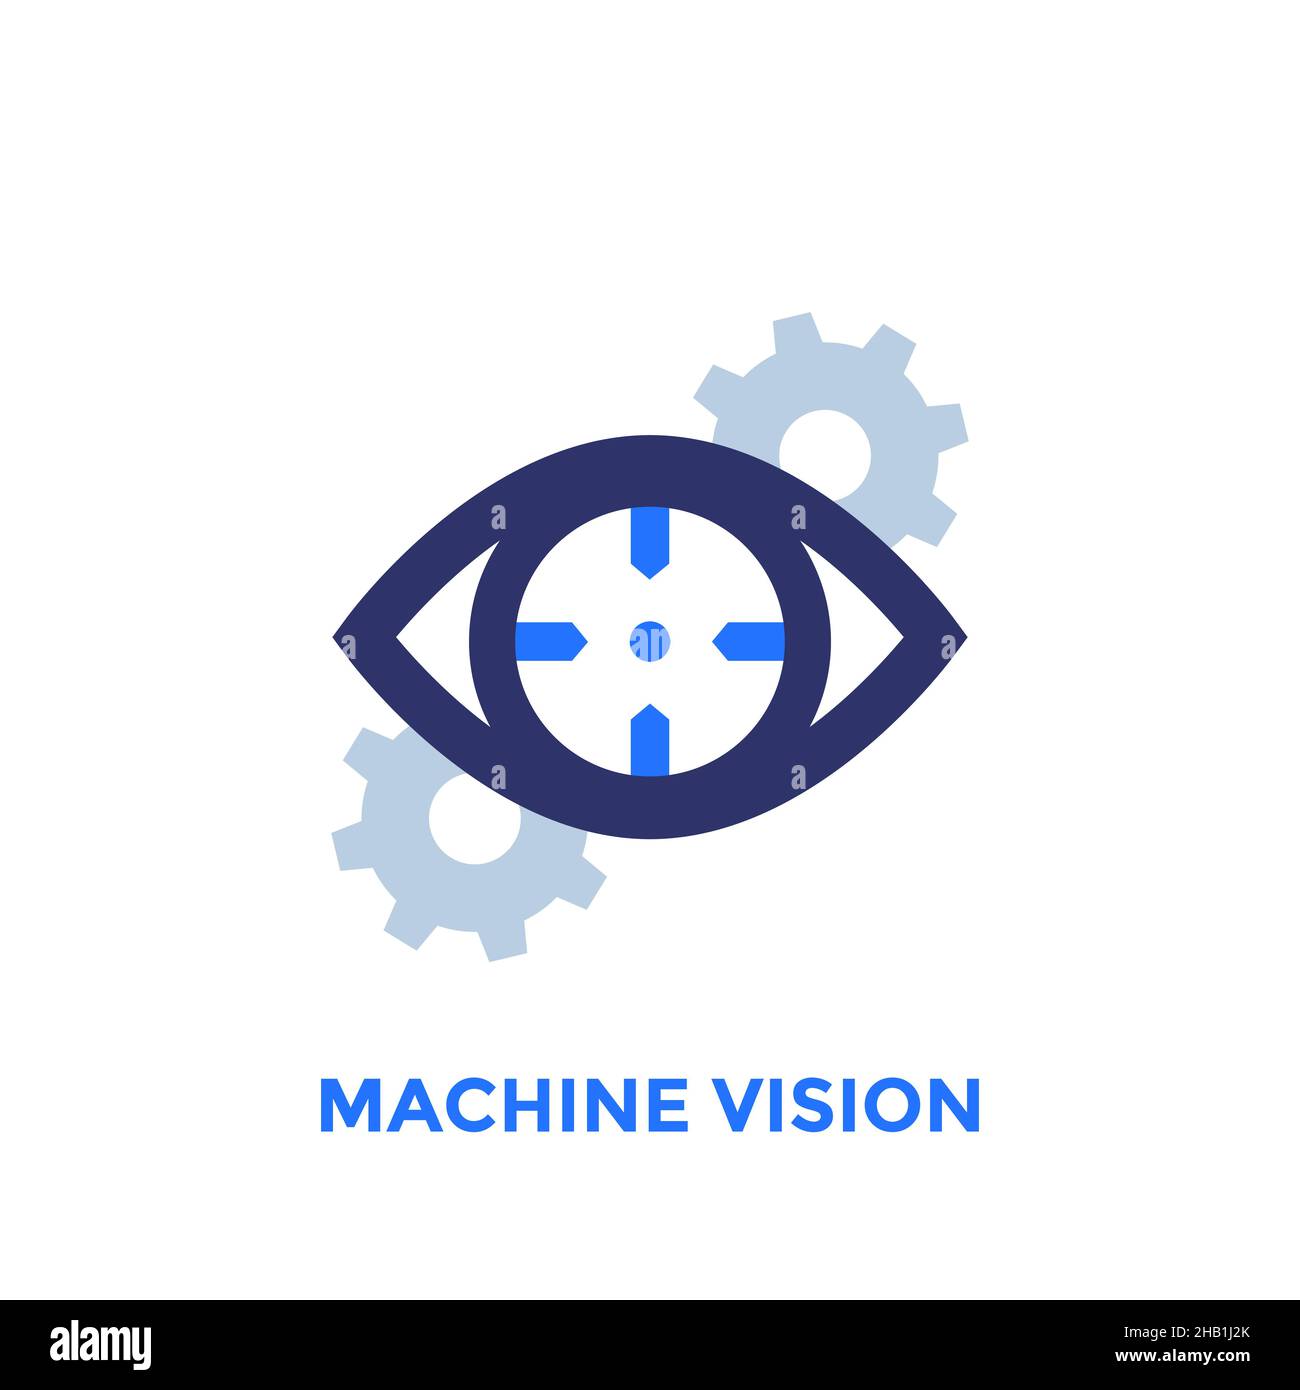 Machine vision icon with gears Stock Vector